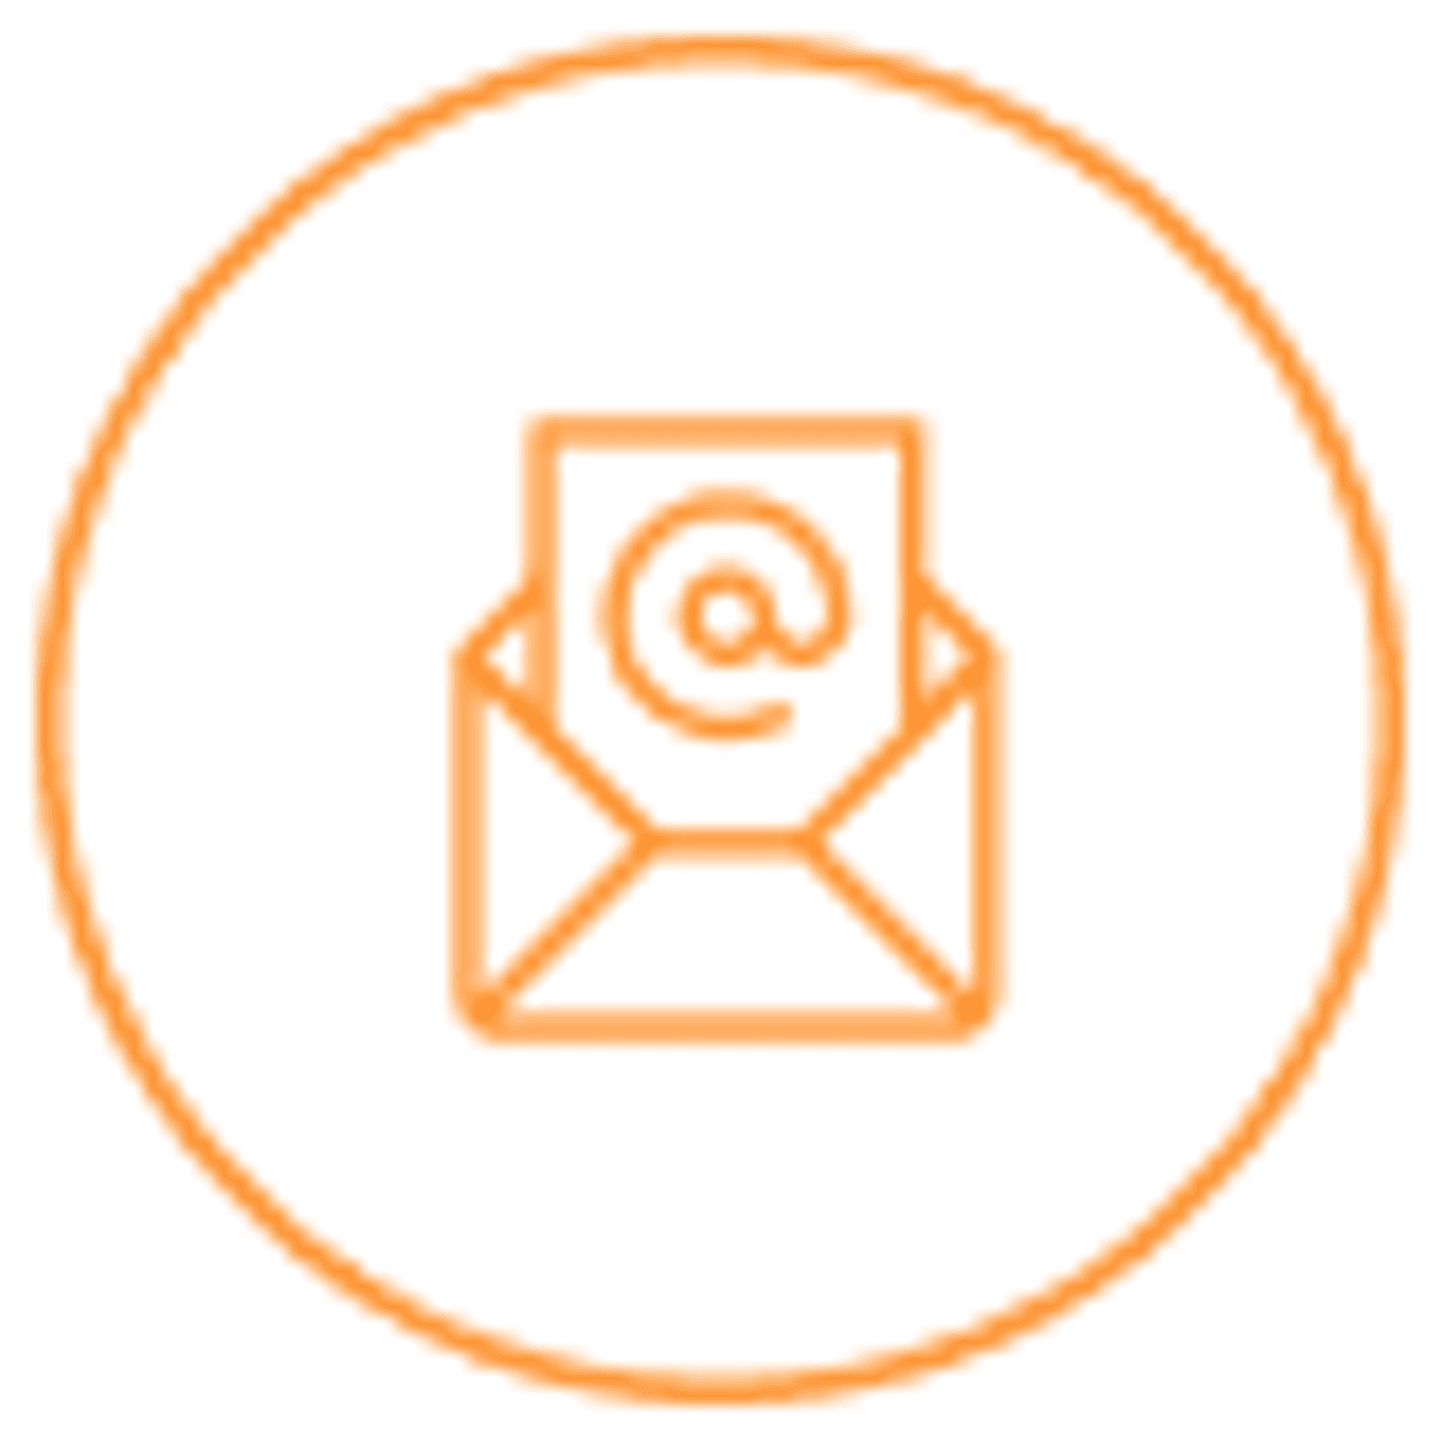 email-capture-image@2x